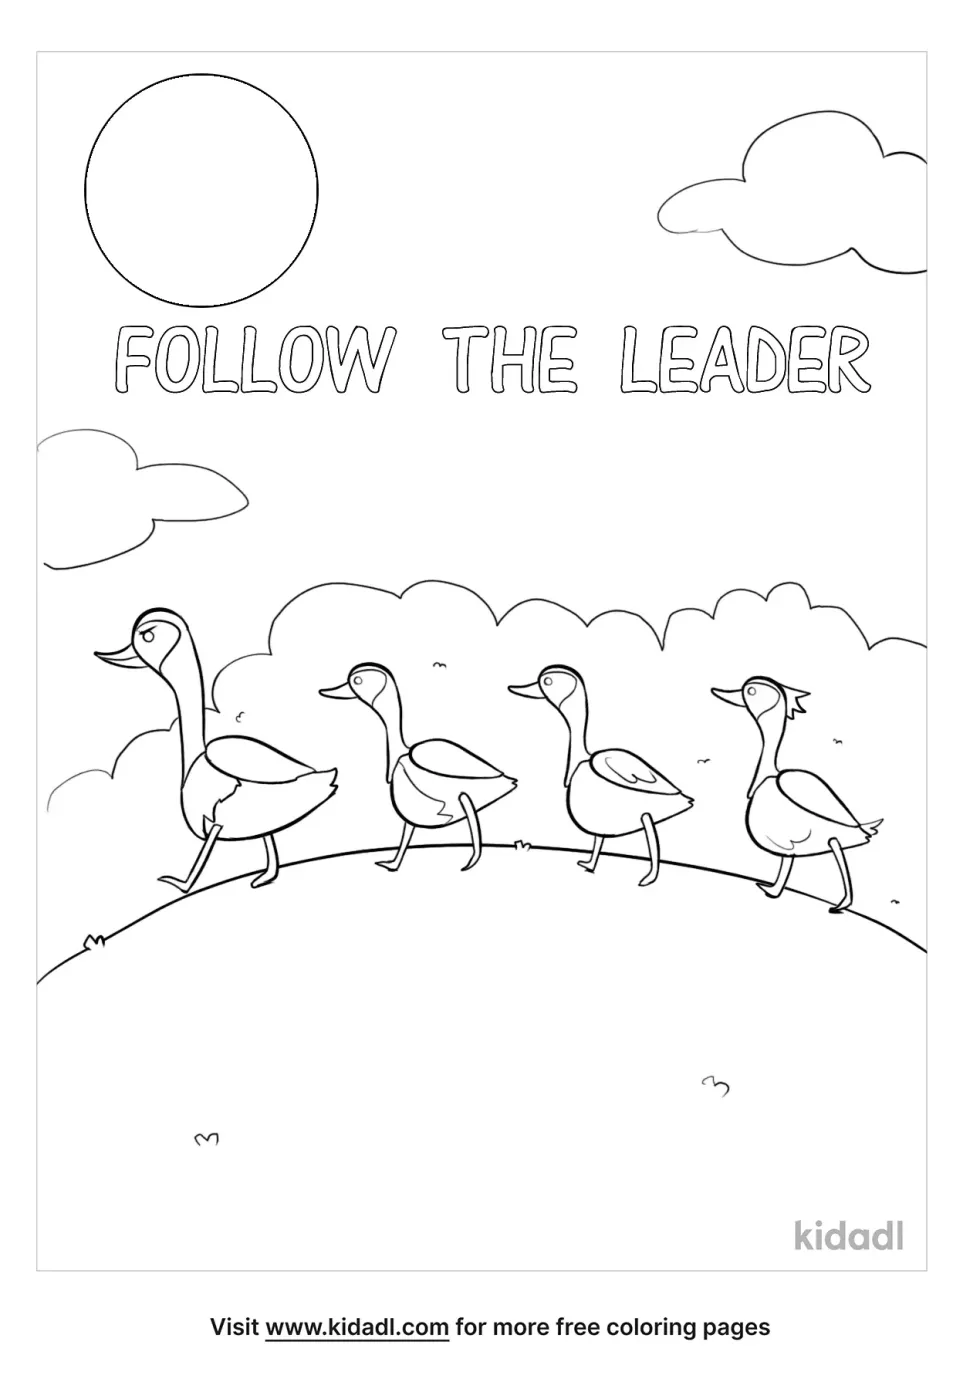 Follow The Leader Coloring Page